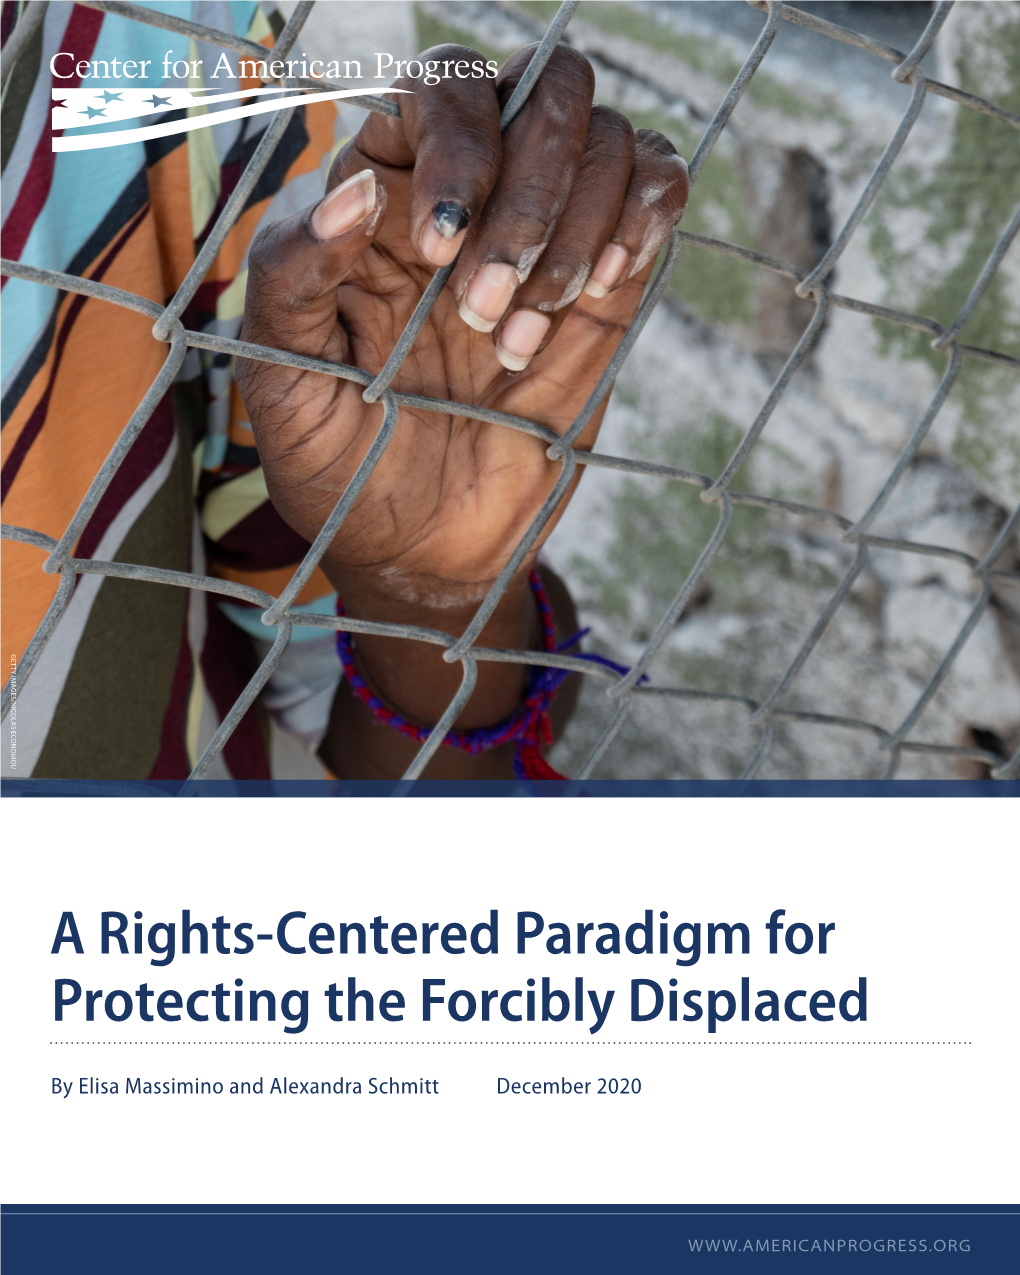 A Rights-Centered Paradigm for Protecting the Forcibly Displaced